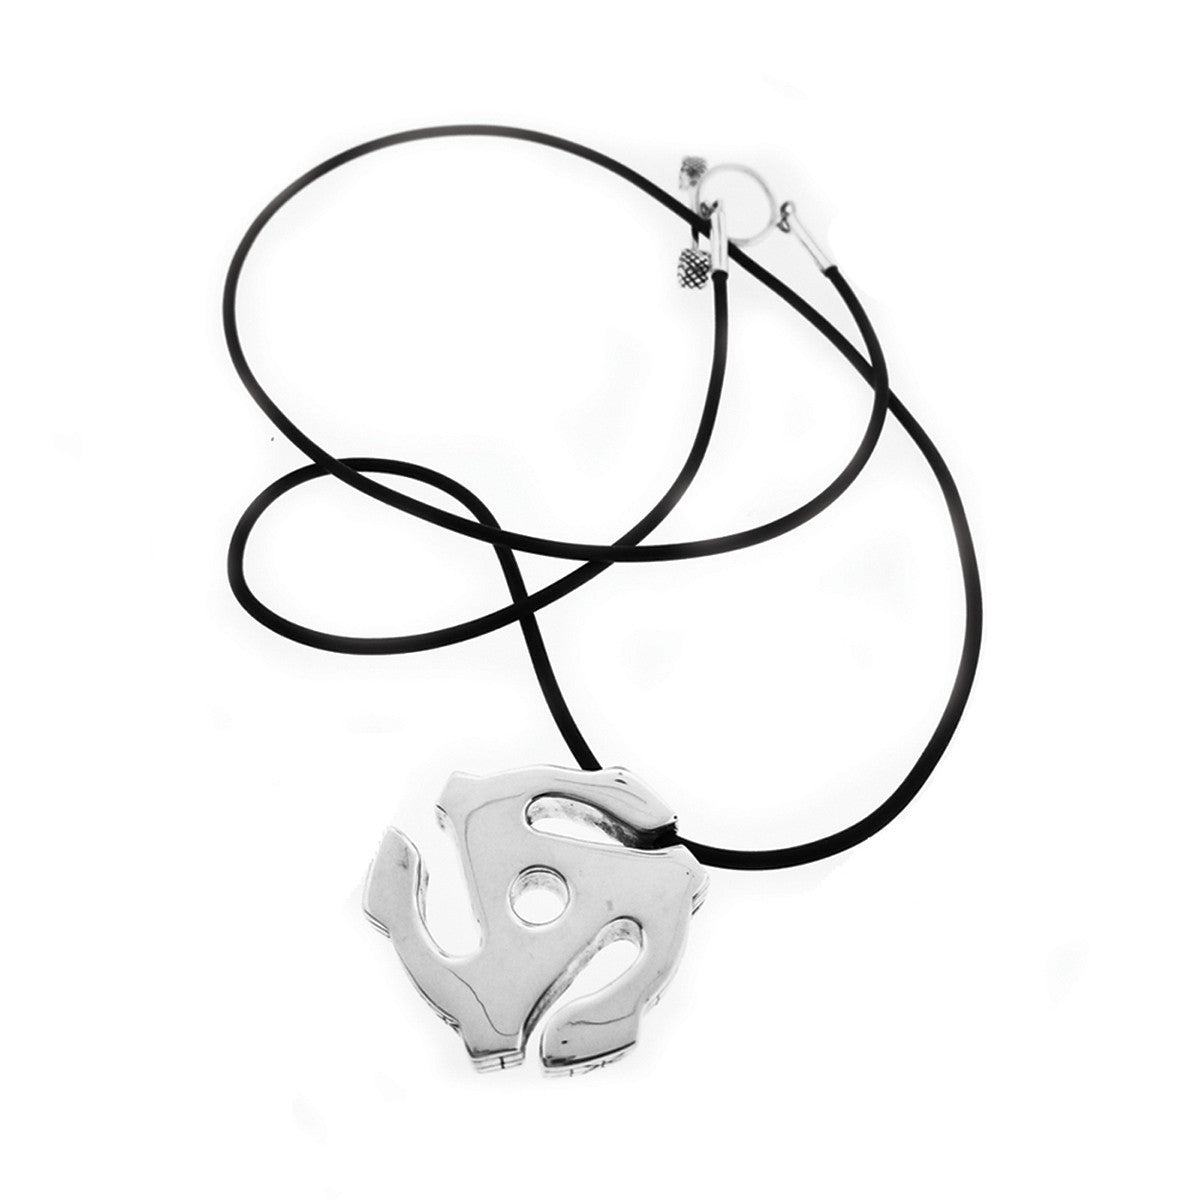 45 RPM Spacer Sterling Silver And Rubber Cord Necklace - Cynthia Gale New York - 1